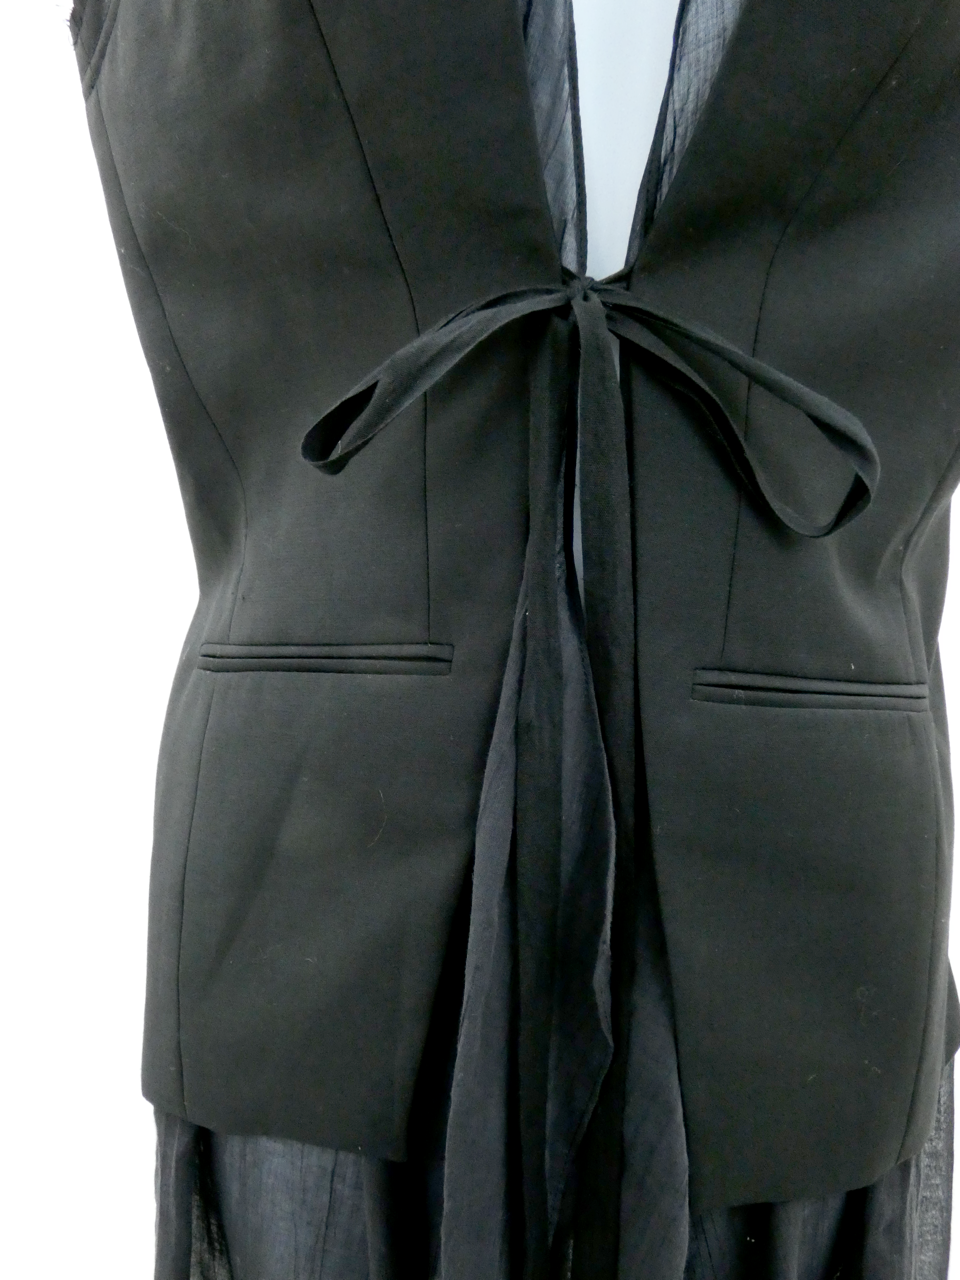 SIGNATURE BLACK CANVAS SLEEVELESS CUTAWAY JACKET WITH INNER COTTON VOILE DRESS